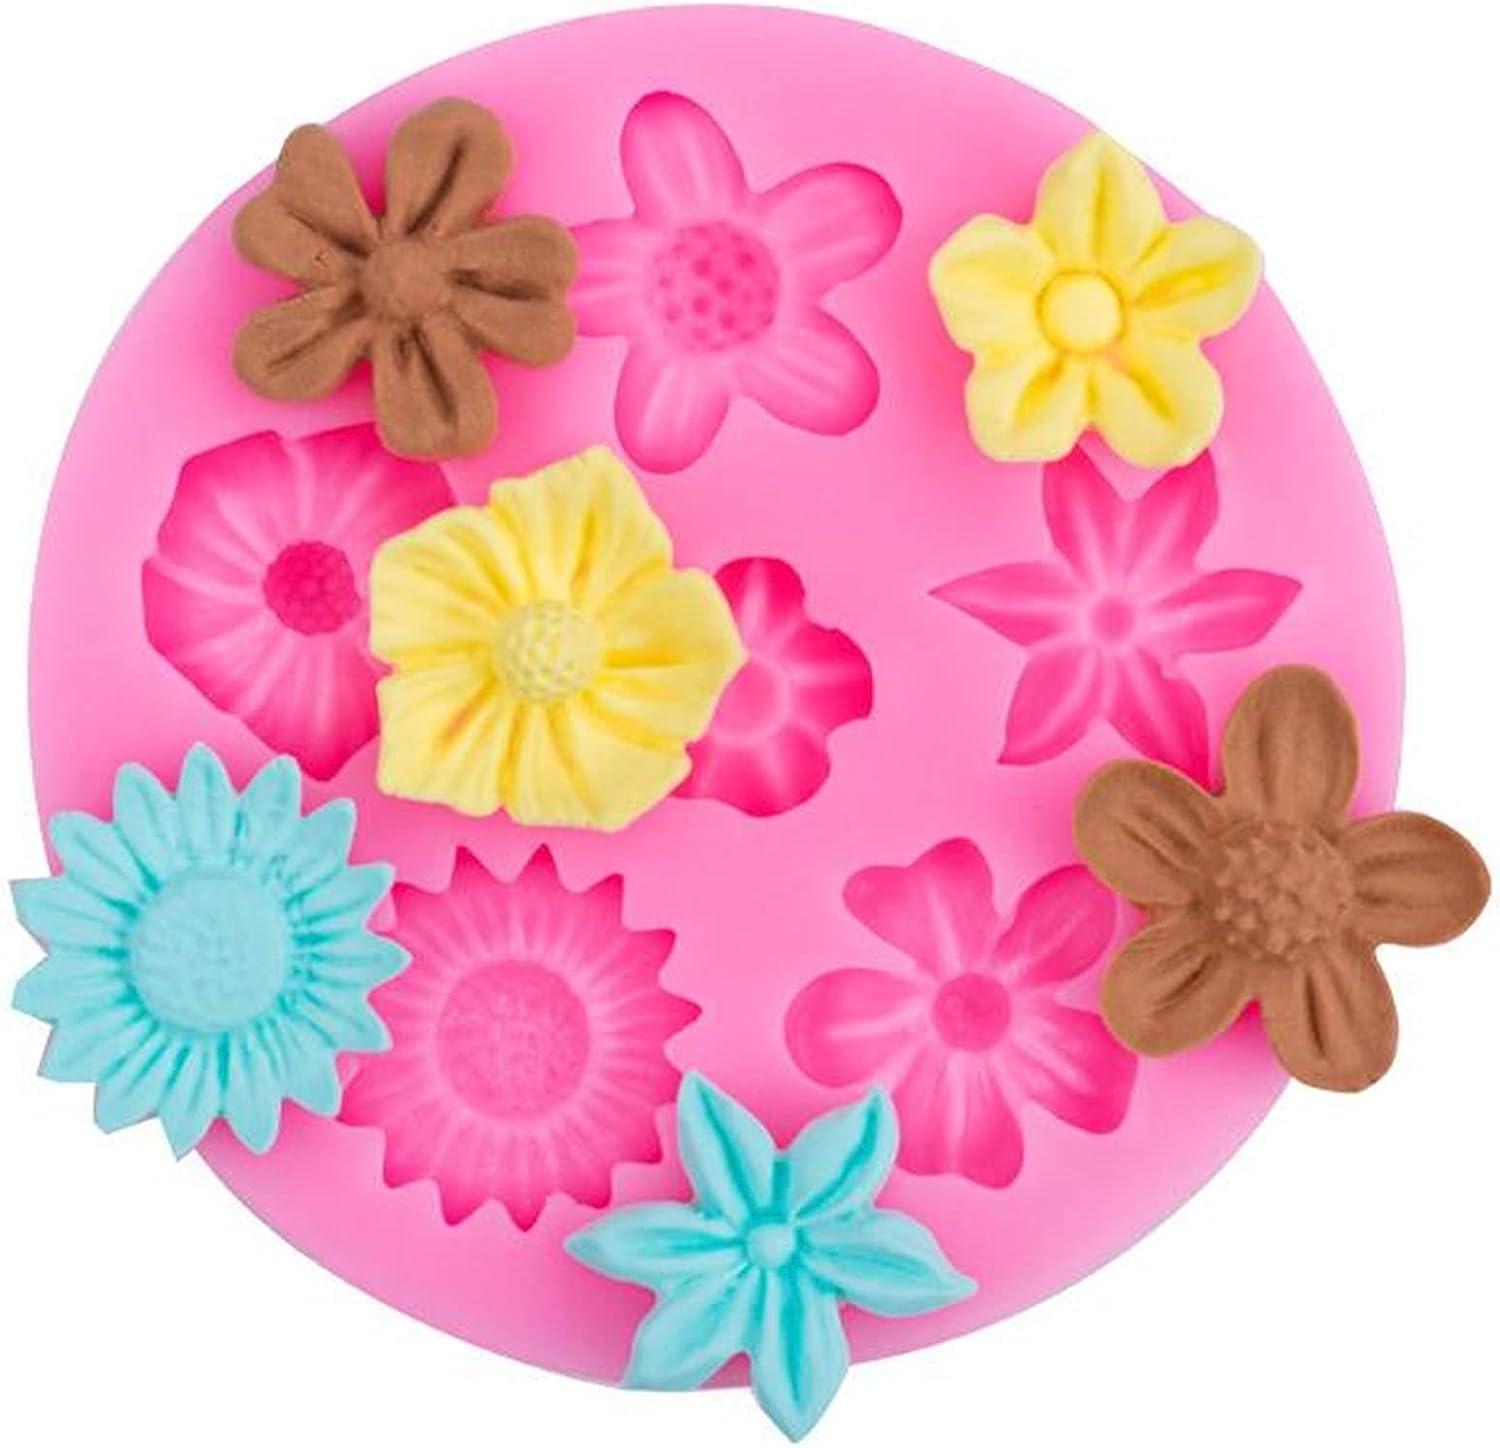 6 Pcs Flower Silicone Mold Set,Rose Daisy Butterfly and Mini Flowers Molds  for Candy Chocolate Fondant Polymer Clay Soap Crafting Projects Cake